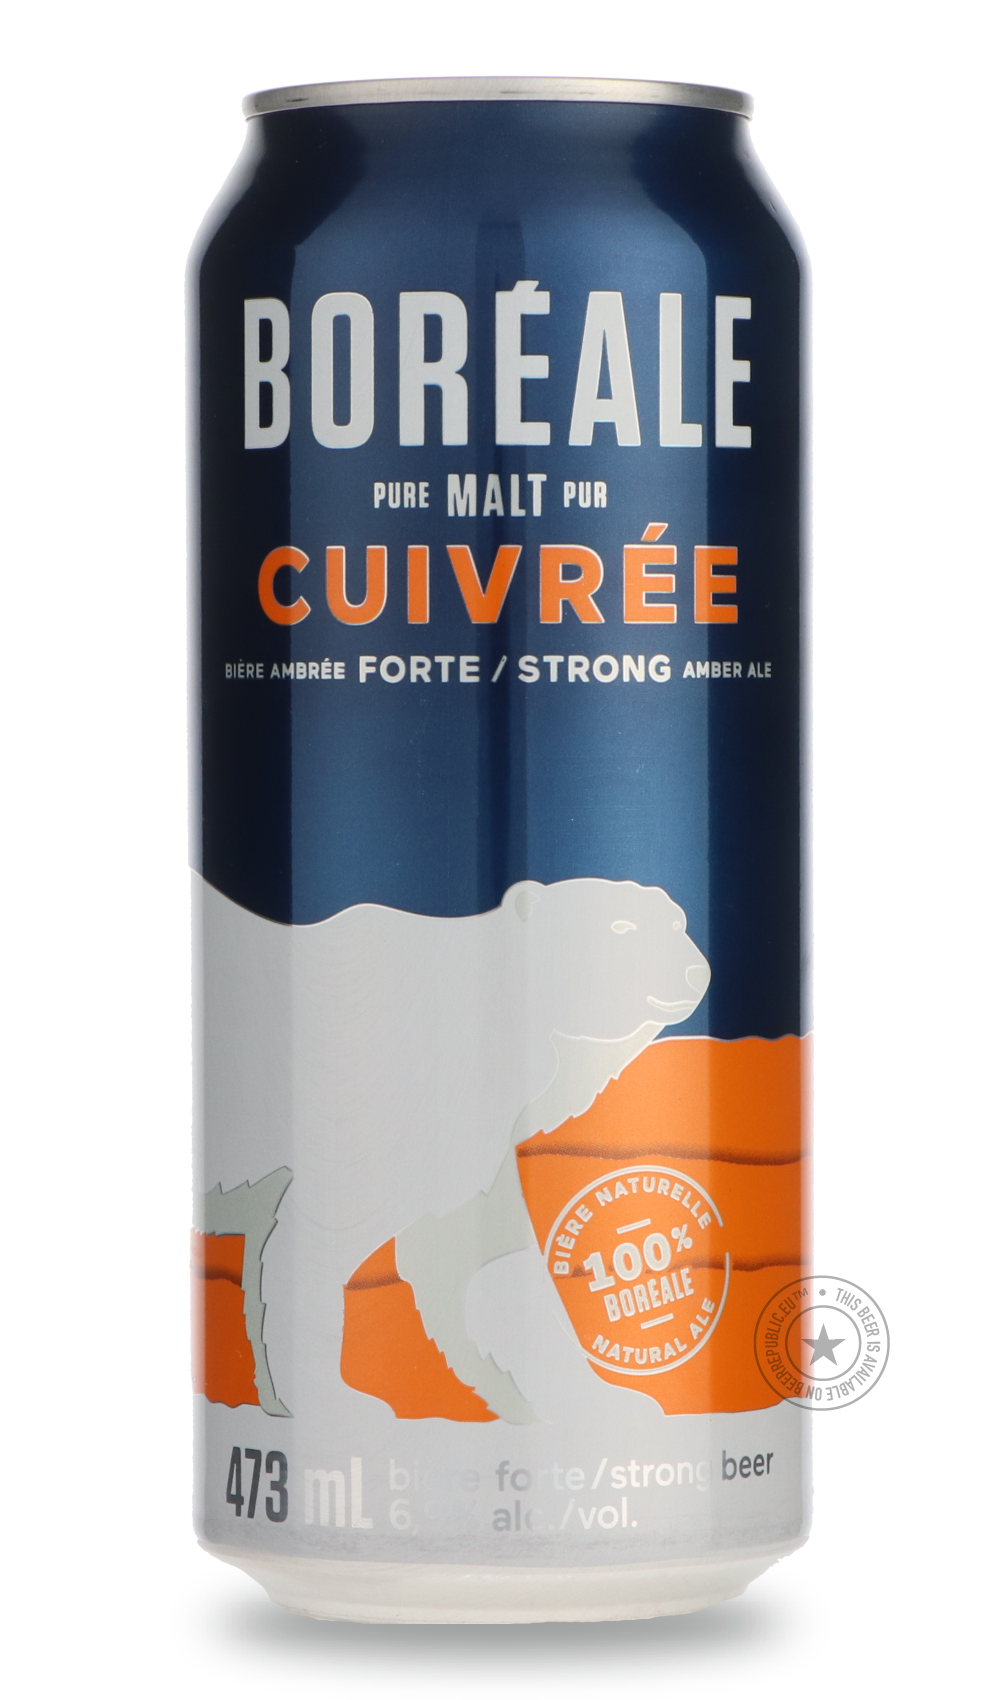 -Boréale- Cuivrée-Pale- Only @ Beer Republic - The best online beer store for American & Canadian craft beer - Buy beer online from the USA and Canada - Bier online kopen - Amerikaans bier kopen - Craft beer store - Craft beer kopen - Amerikanisch bier kaufen - Bier online kaufen - Acheter biere online - IPA - Stout - Porter - New England IPA - Hazy IPA - Imperial Stout - Barrel Aged - Barrel Aged Imperial Stout - Brown - Dark beer - Blond - Blonde - Pilsner - Lager - Wheat - Weizen - Amber - Barley Wine - 